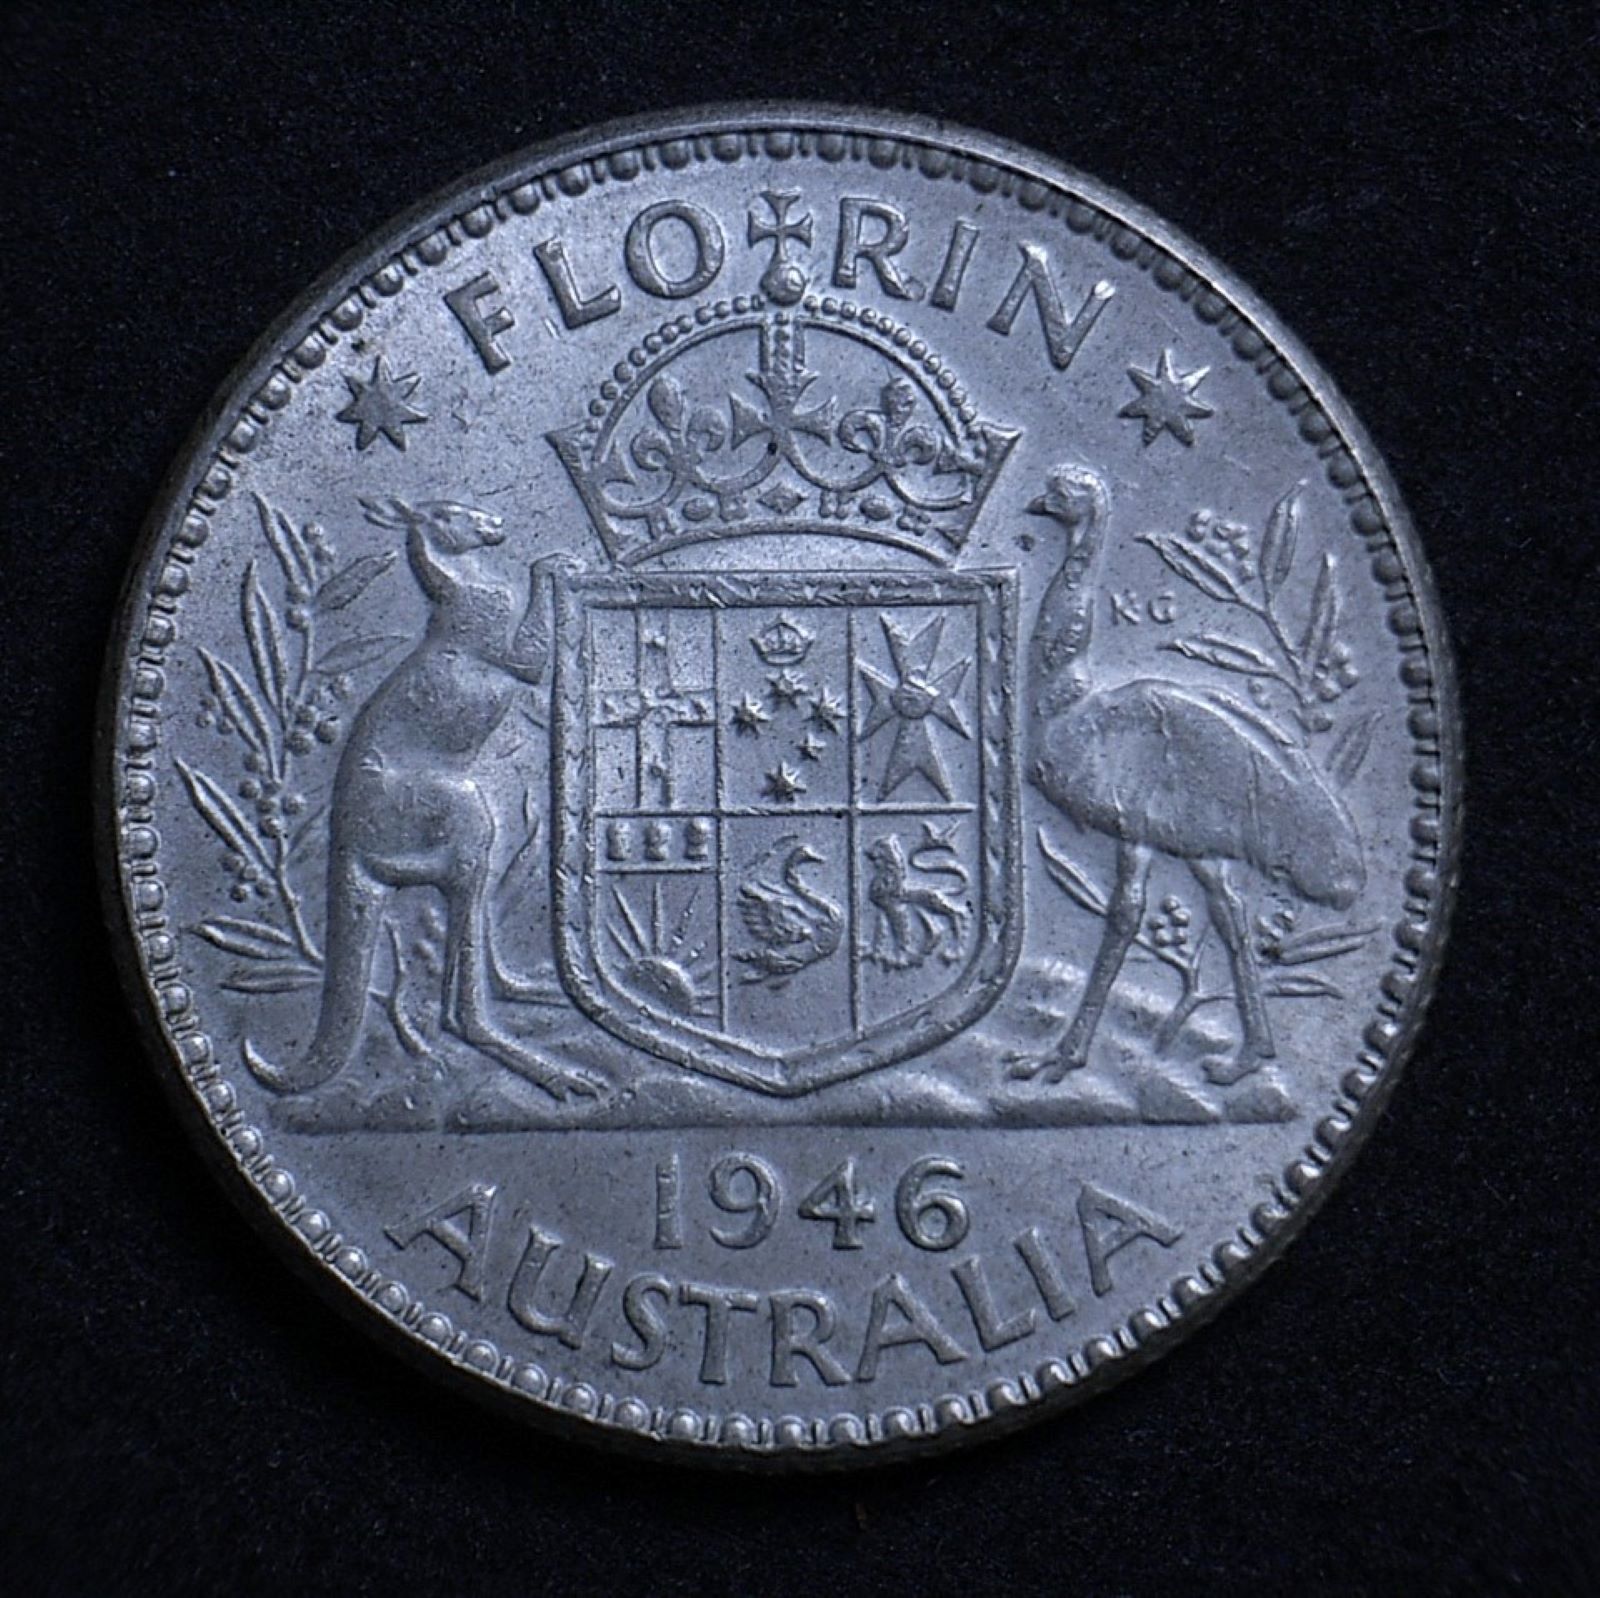 Close up Aussie 1946 florin reverse showing detail of the coin